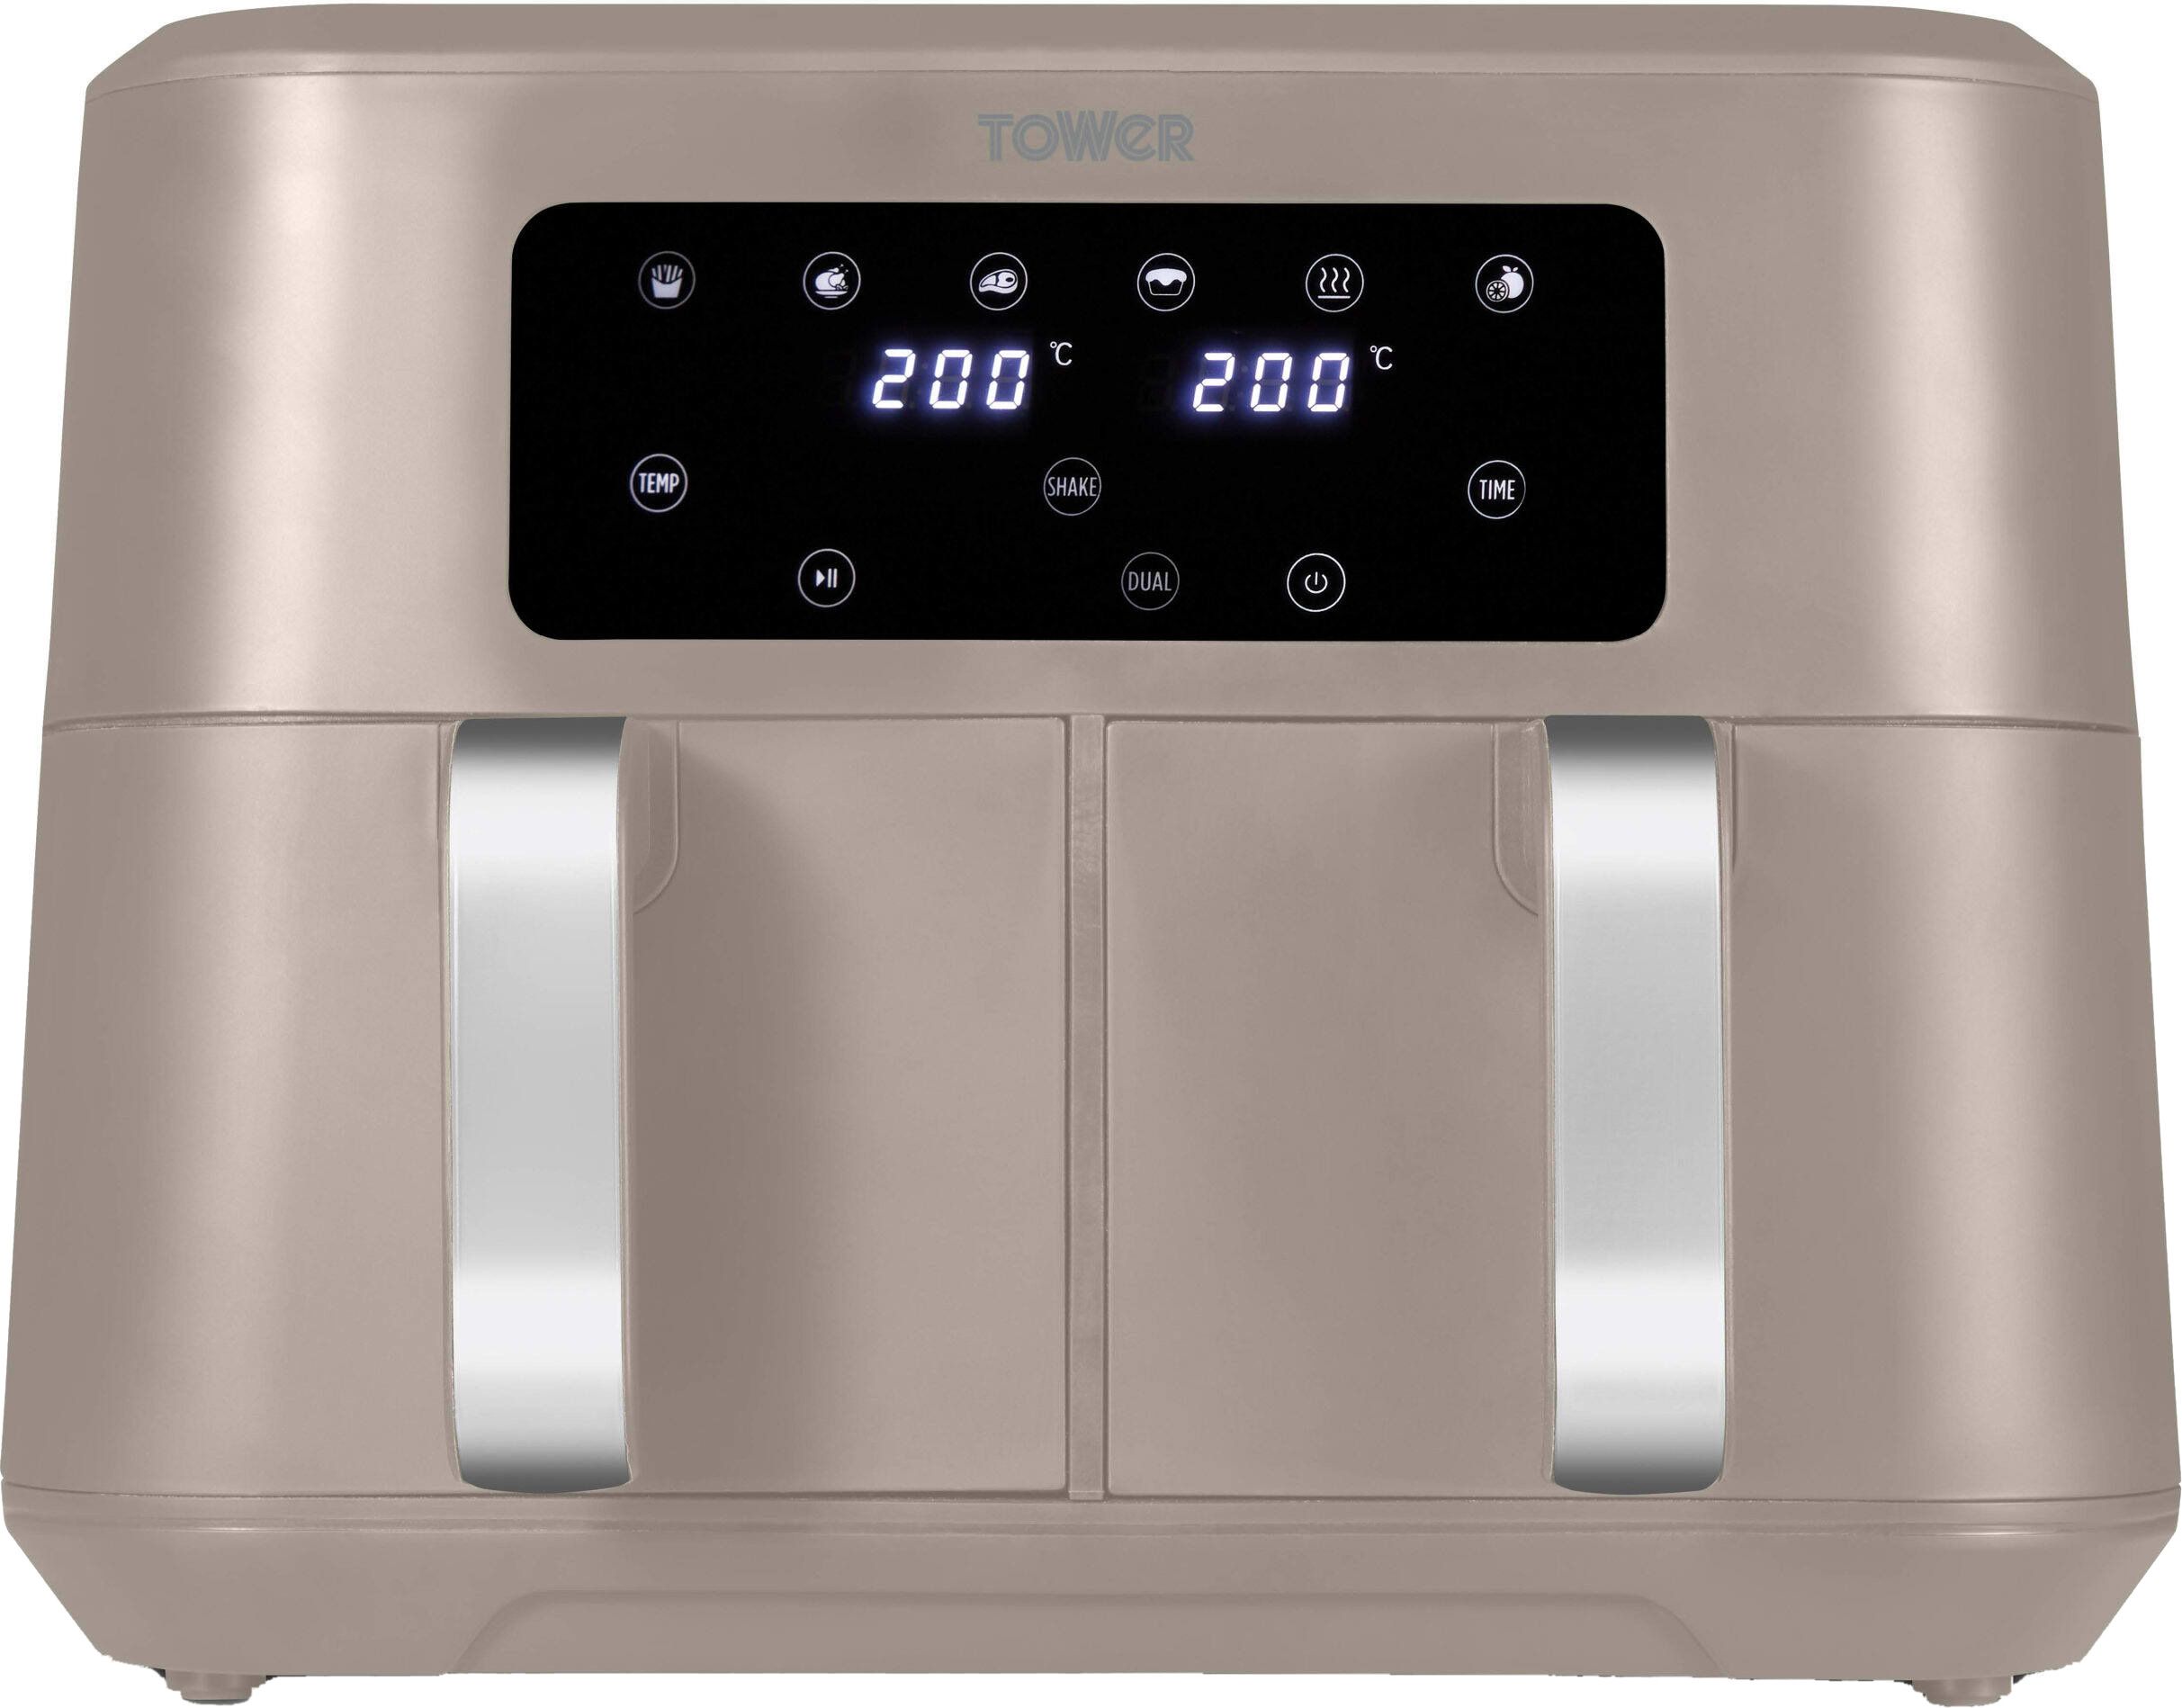 Tower T17137MSH Dual Drawer Air Fryer - Taupe, Brown